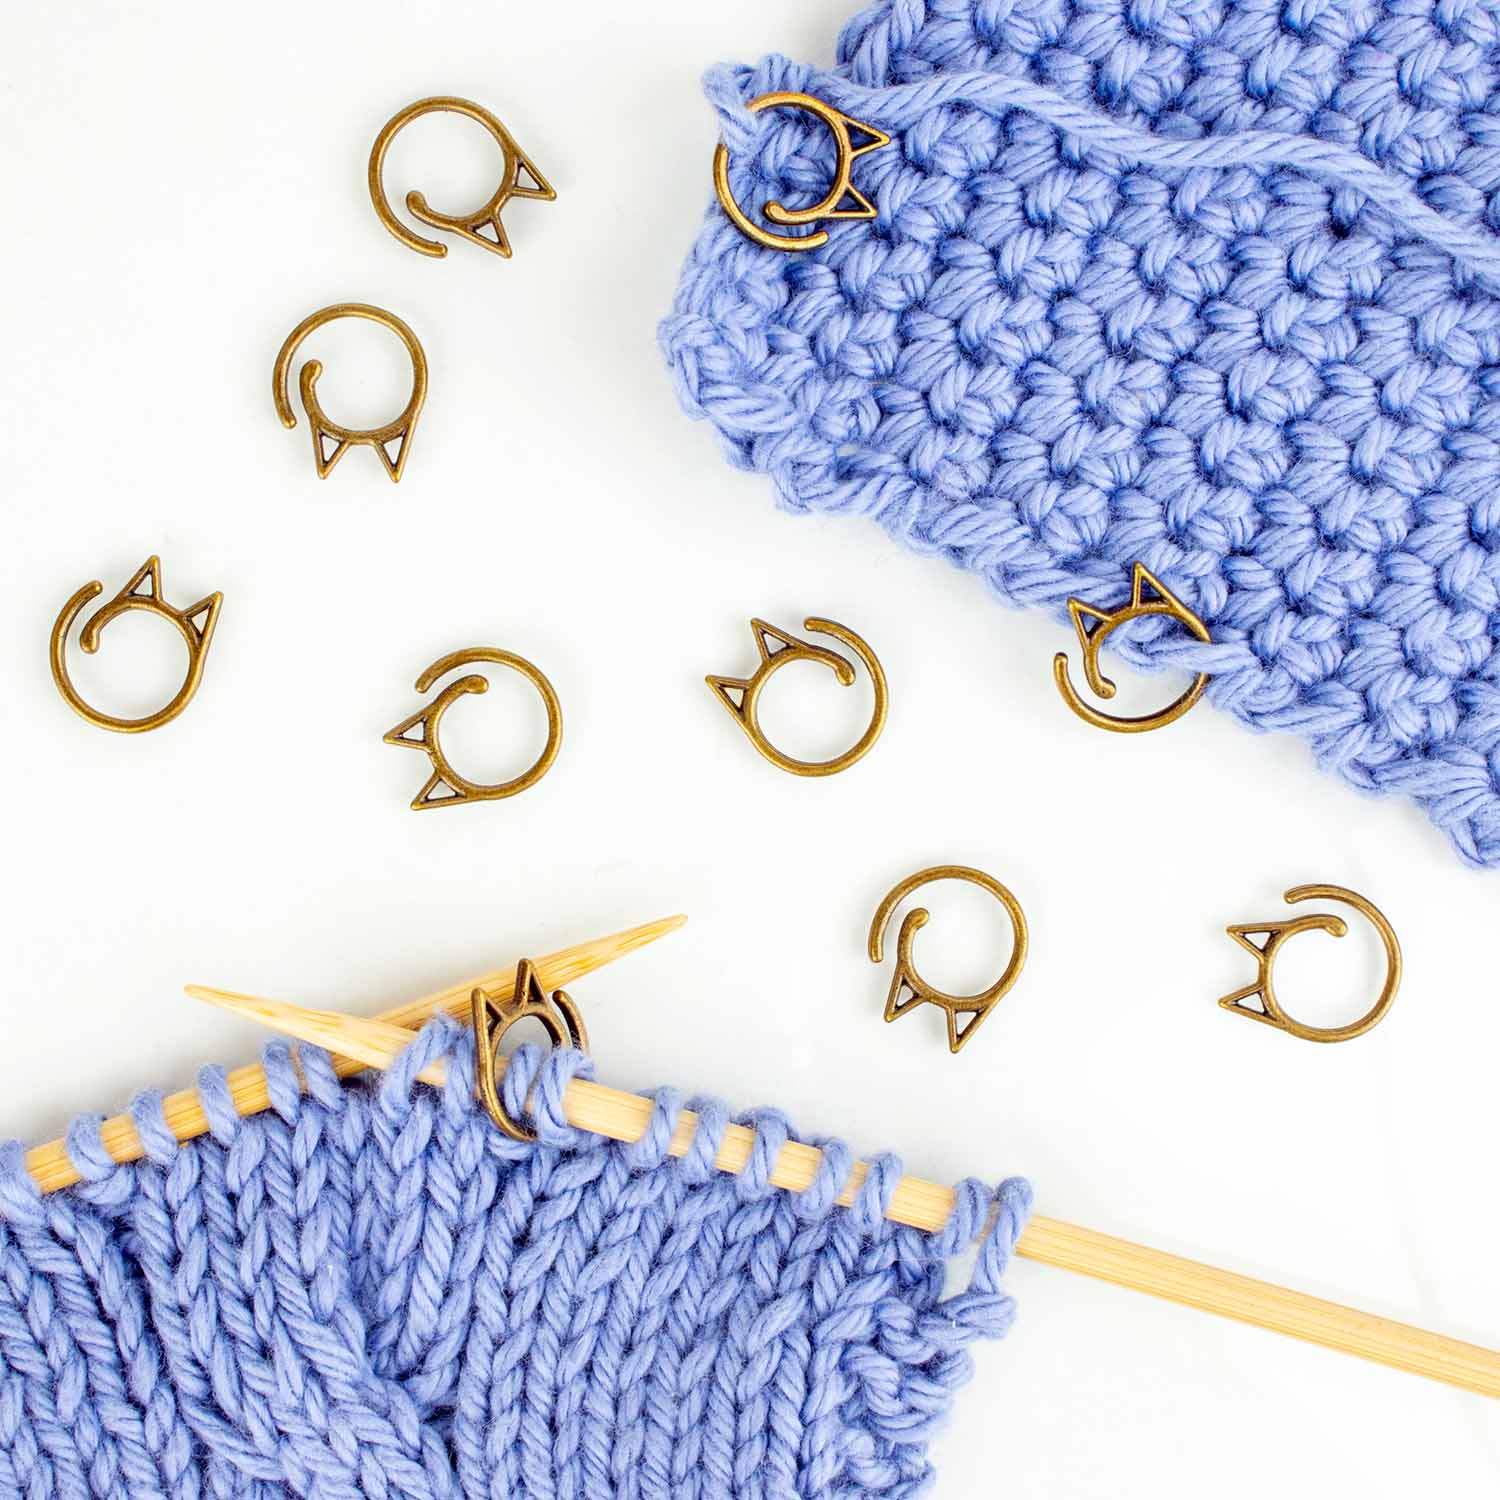 Cat Clips - Simple Removable Stitch Markers - Twice Sheared Sheep